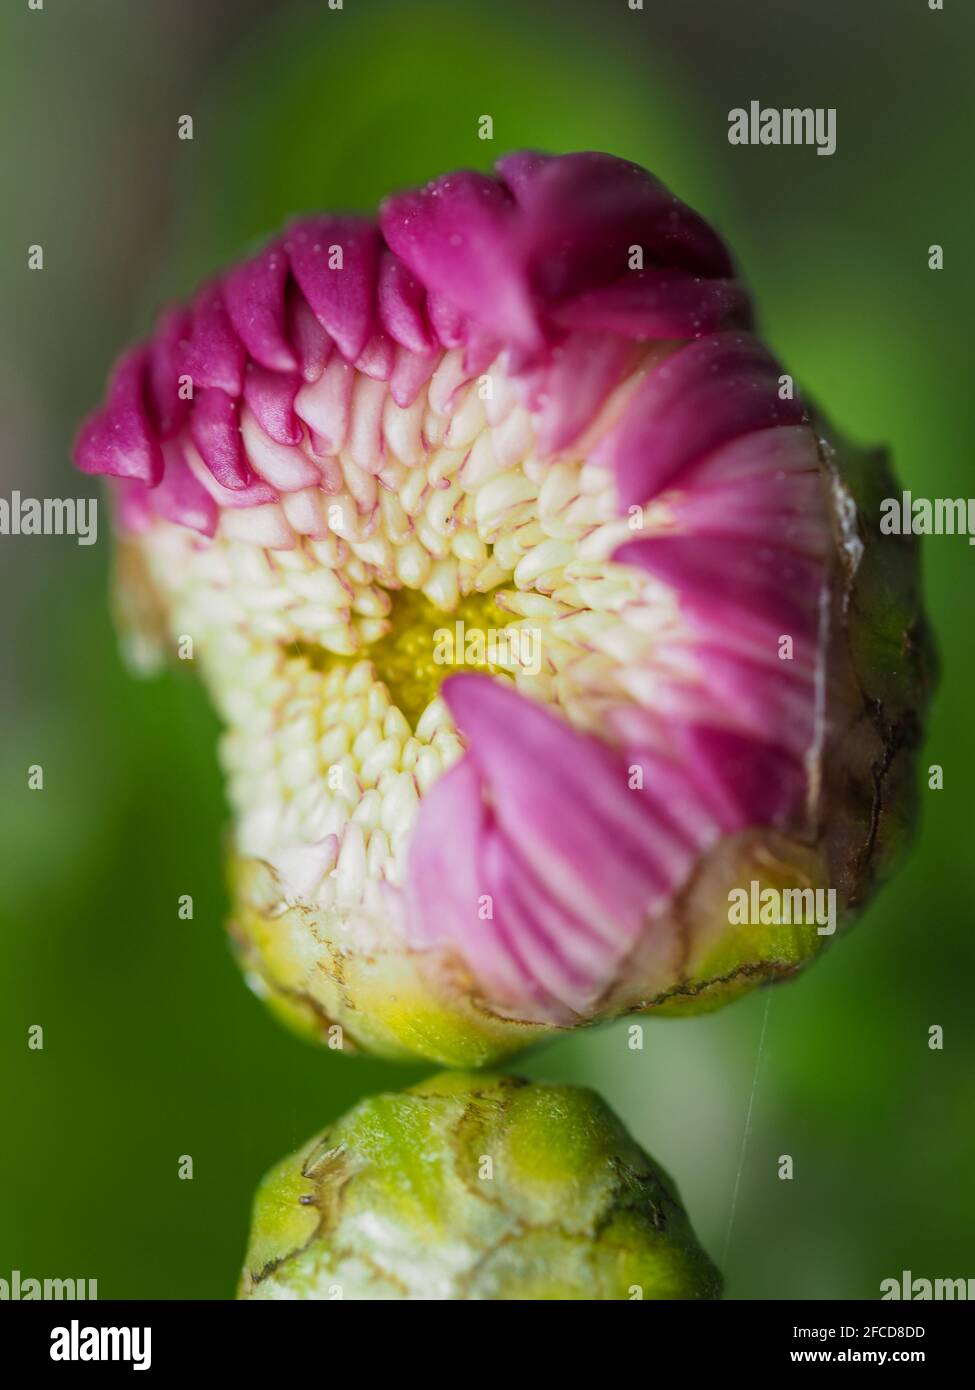 Pink Chrysanthemum flower bud opening, on a blurred green foliage background. New inner petals still white, macro Stock Photo